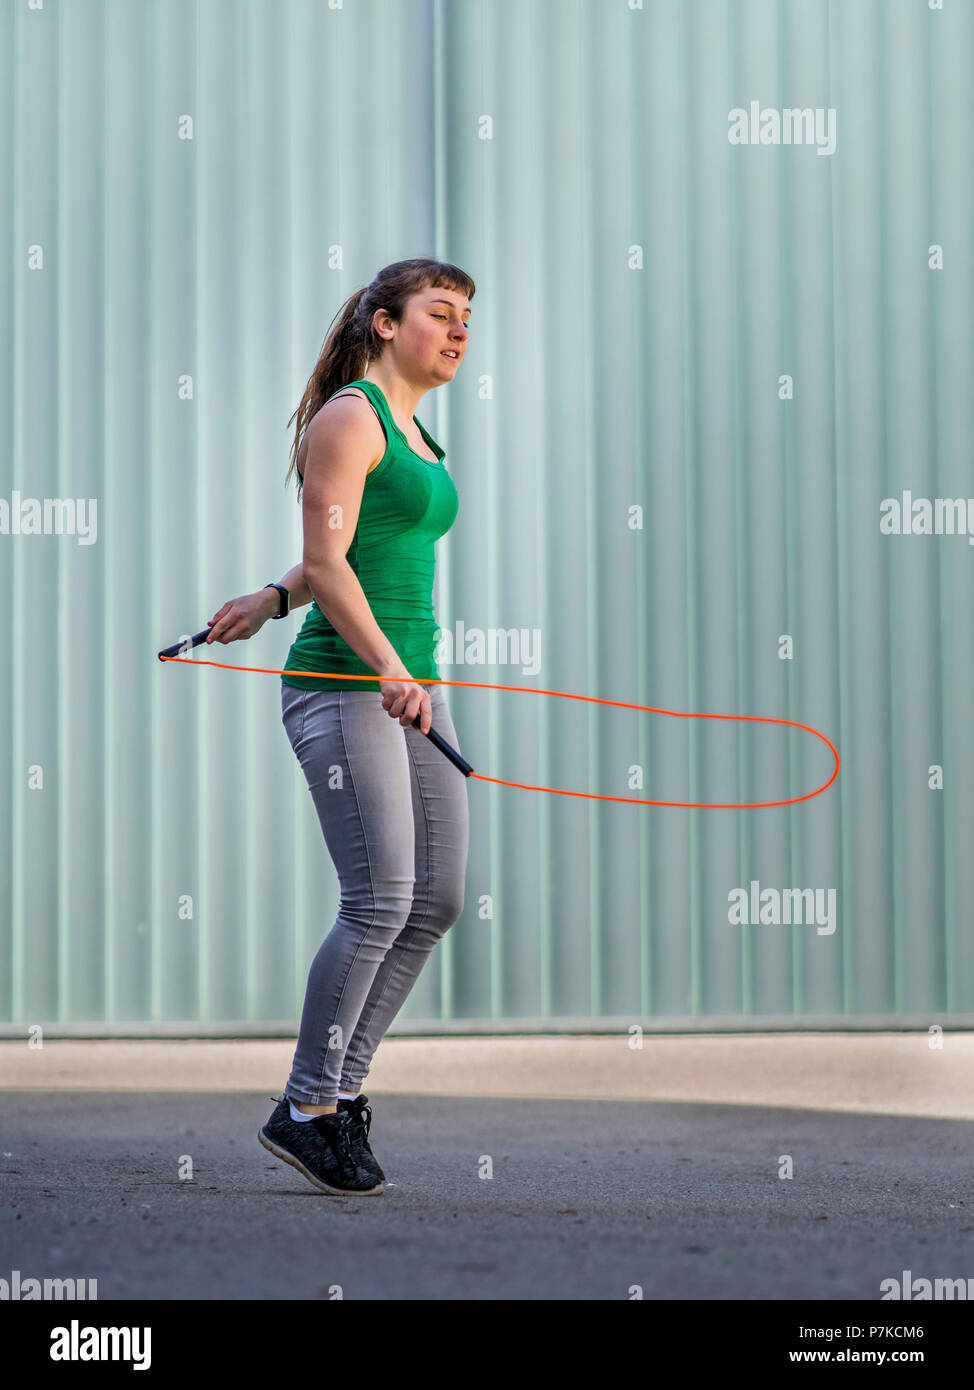 Teenager jumping rope, 18 years old, female, urban environment Stock Photo